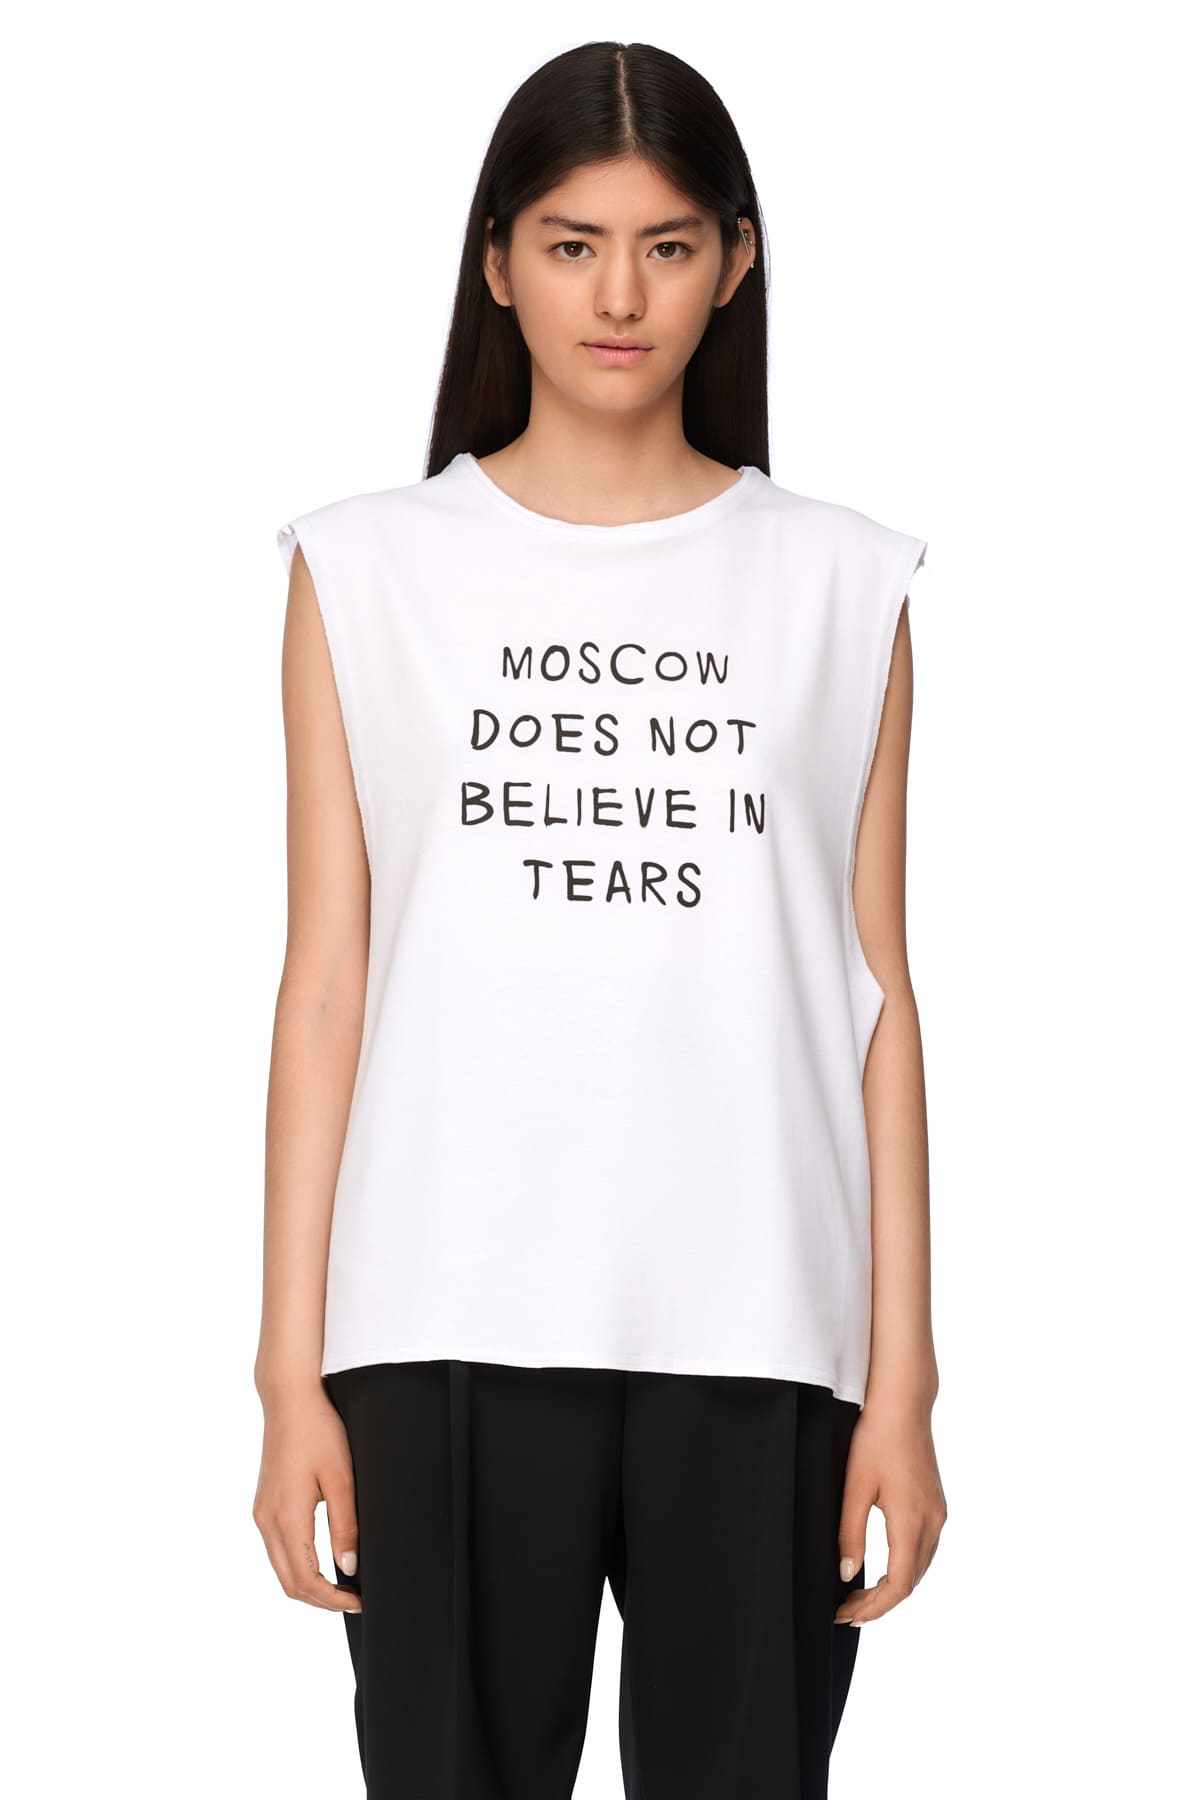 Moscow does not believe in tears Top